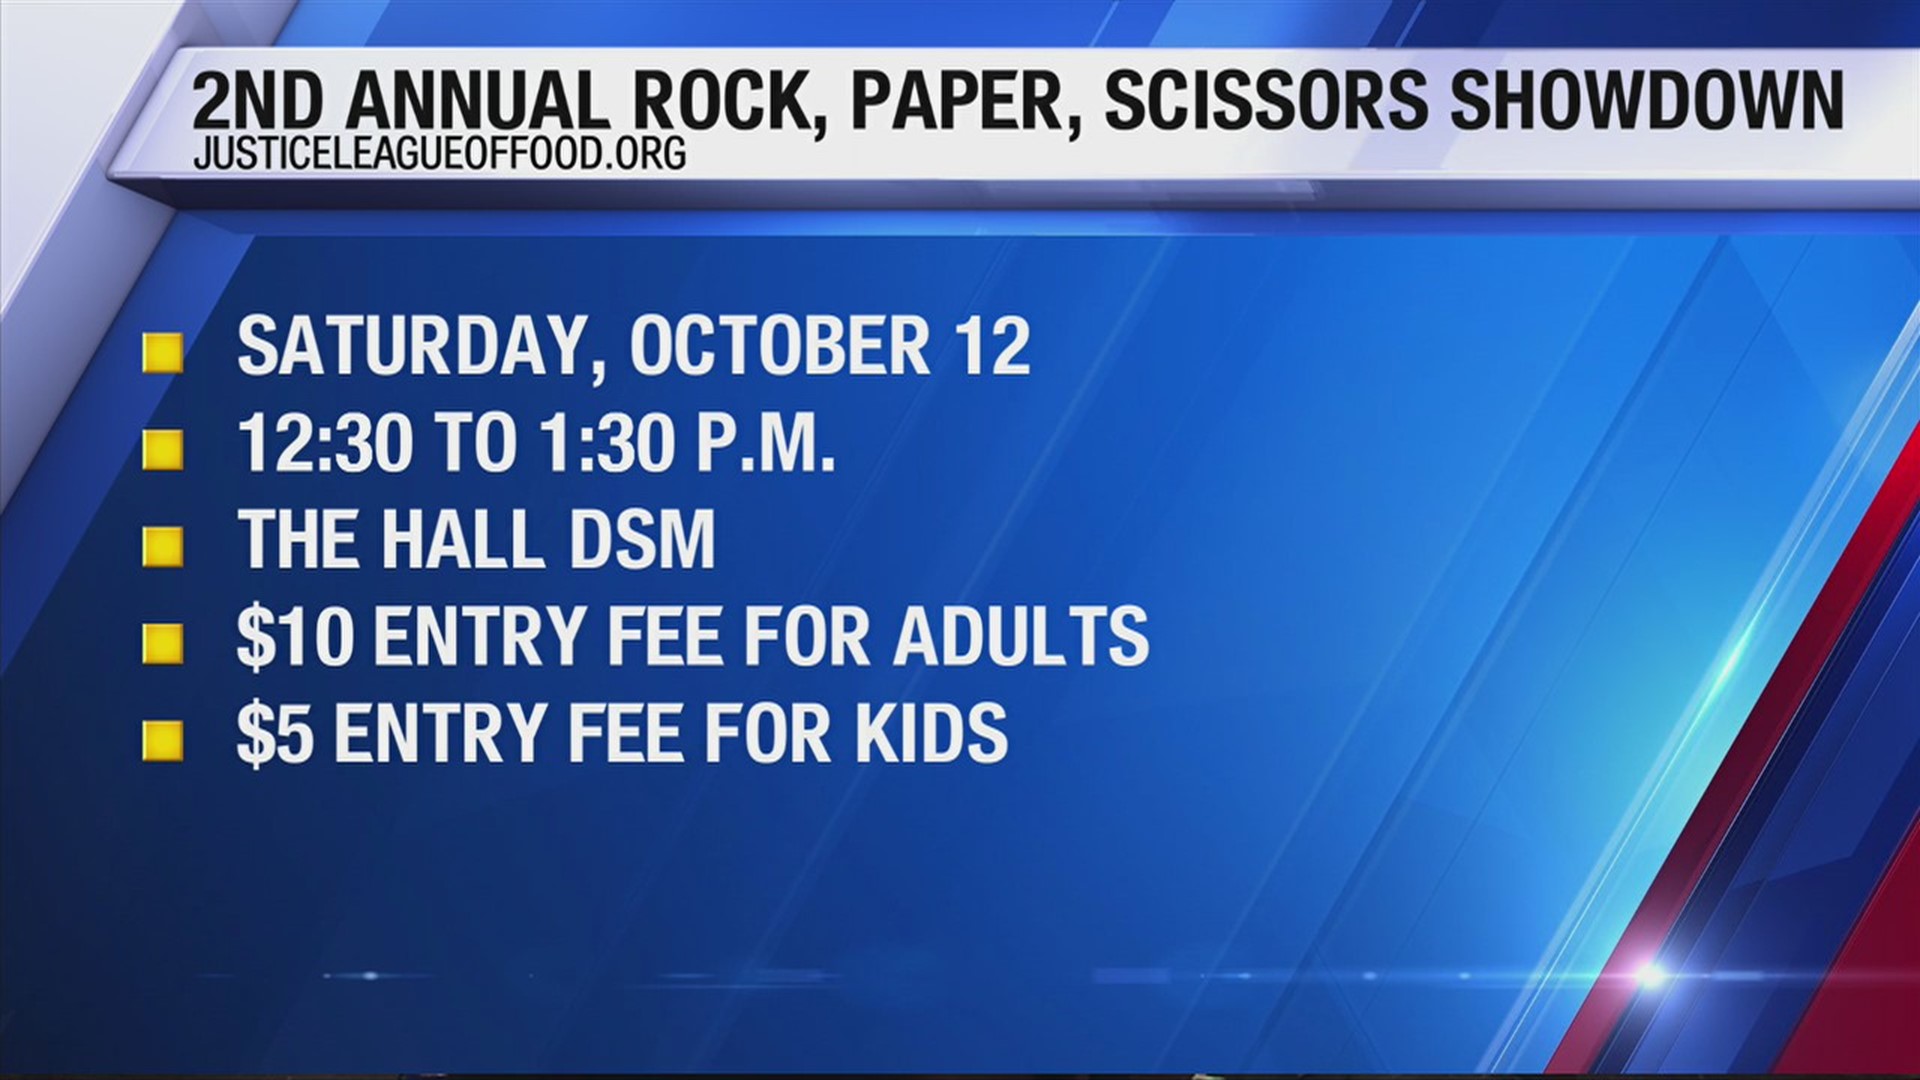 Loosen up your fingers and test your skills as the 2nd Annual Rock, Paper, Scissors Showdown returns this weekend.